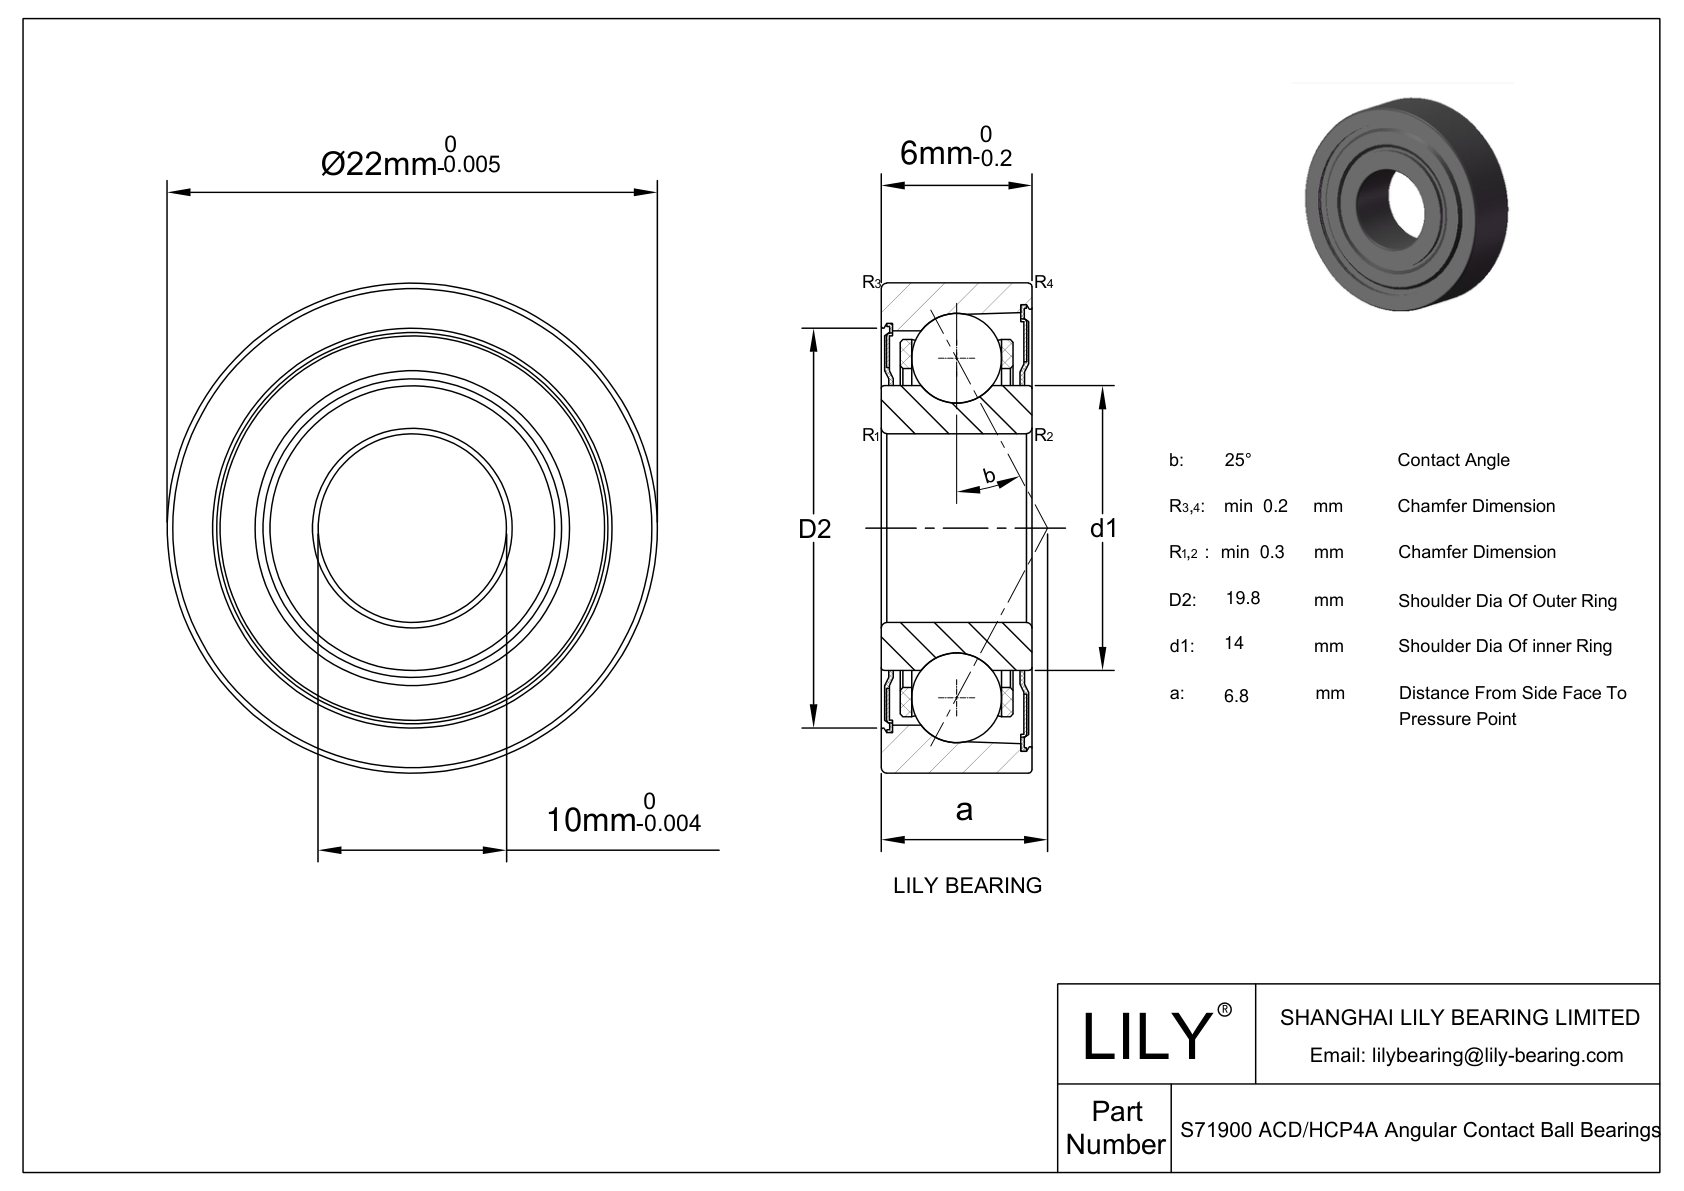 S71900 ACD/HCP4A Super Precision Angular Contact Ball Bearings cad drawing